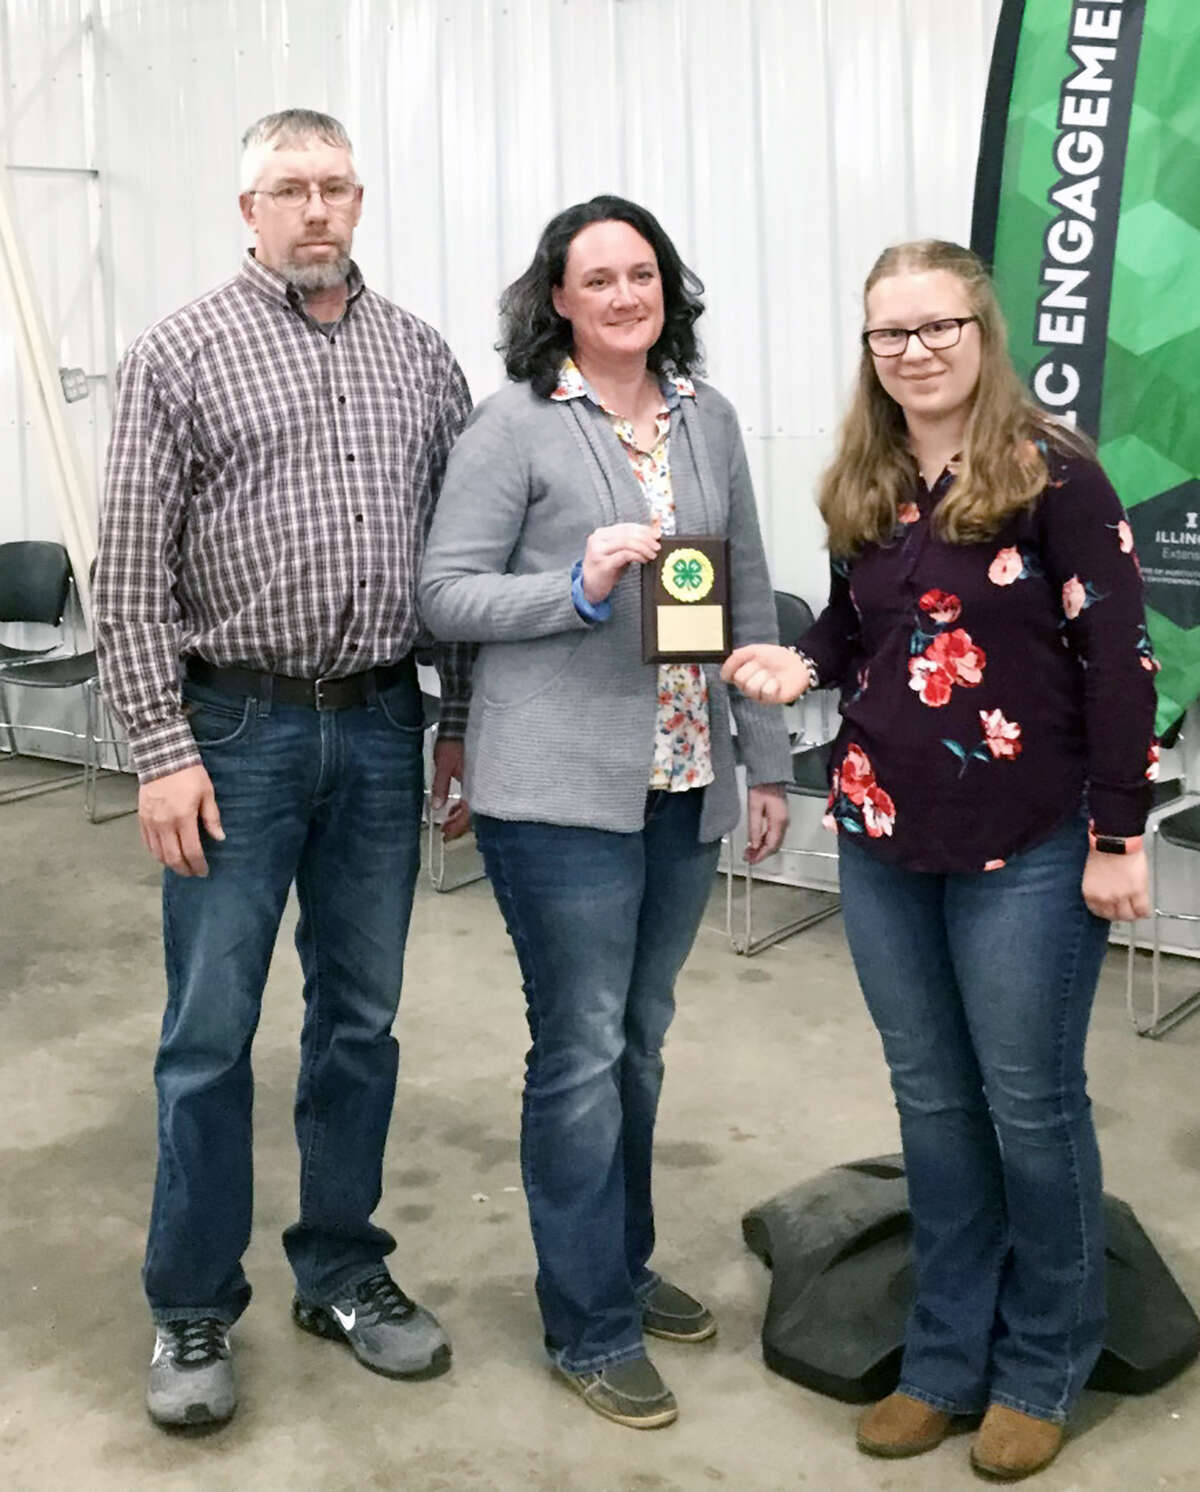 Morgan County 4-H recently held its 78th annual Achievement Night, during which Savanna Ford (right) presented Jeremy and Abby Walker with the Friend of 4-H Award.